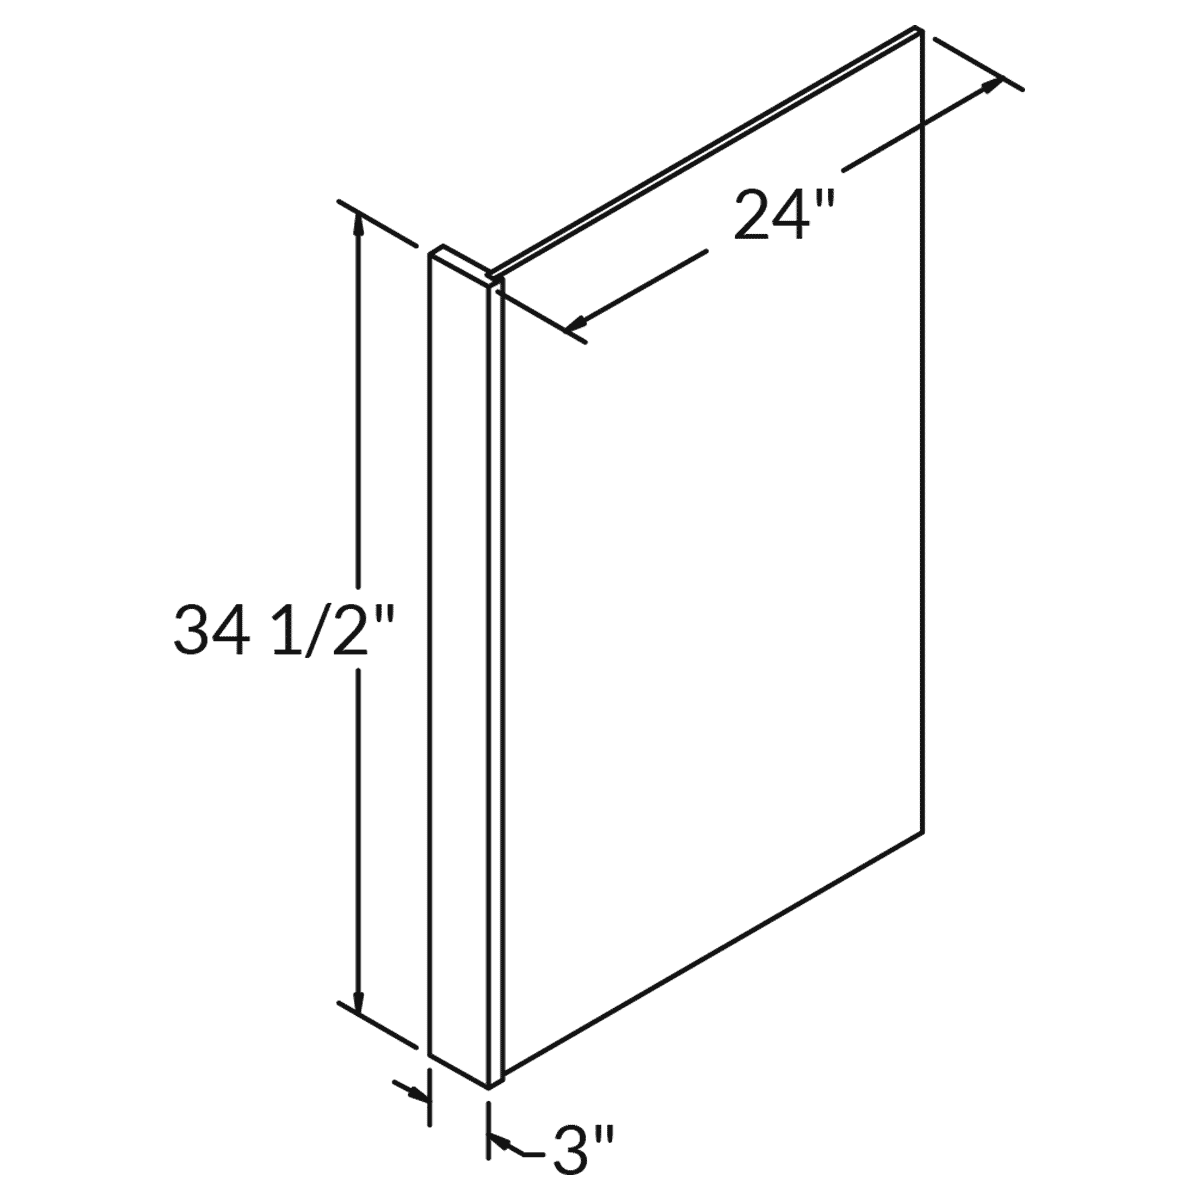 Dishwasher End Panel With 3 Stile 34 1 2 X 24 For Blue Shaker Cabinetry